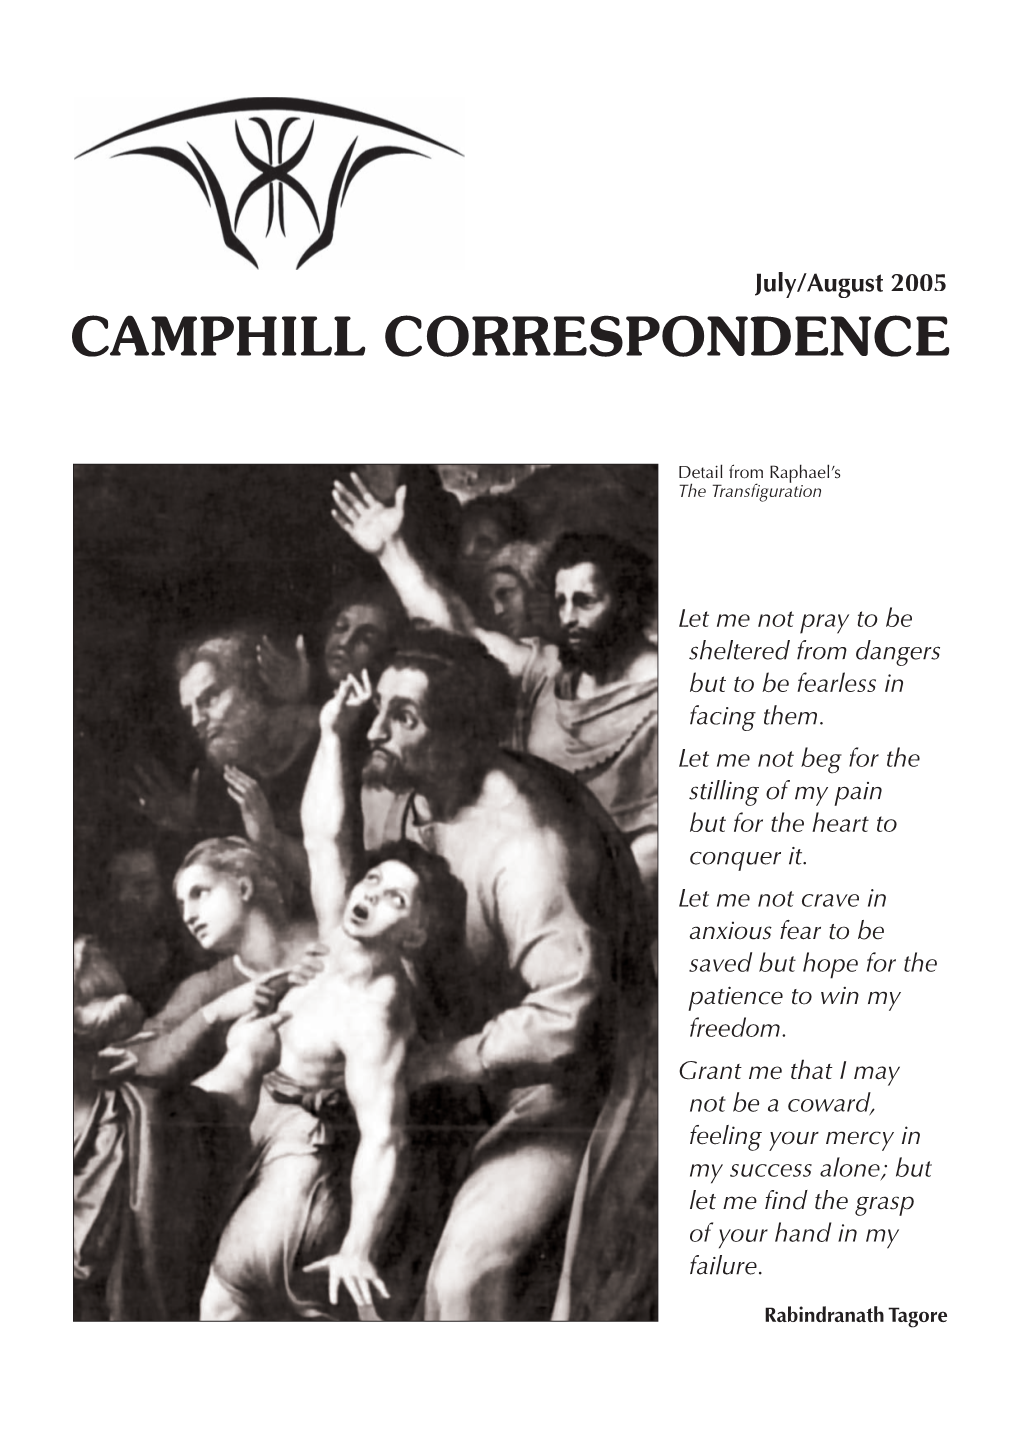 Camphill Correspondence July/August 2005